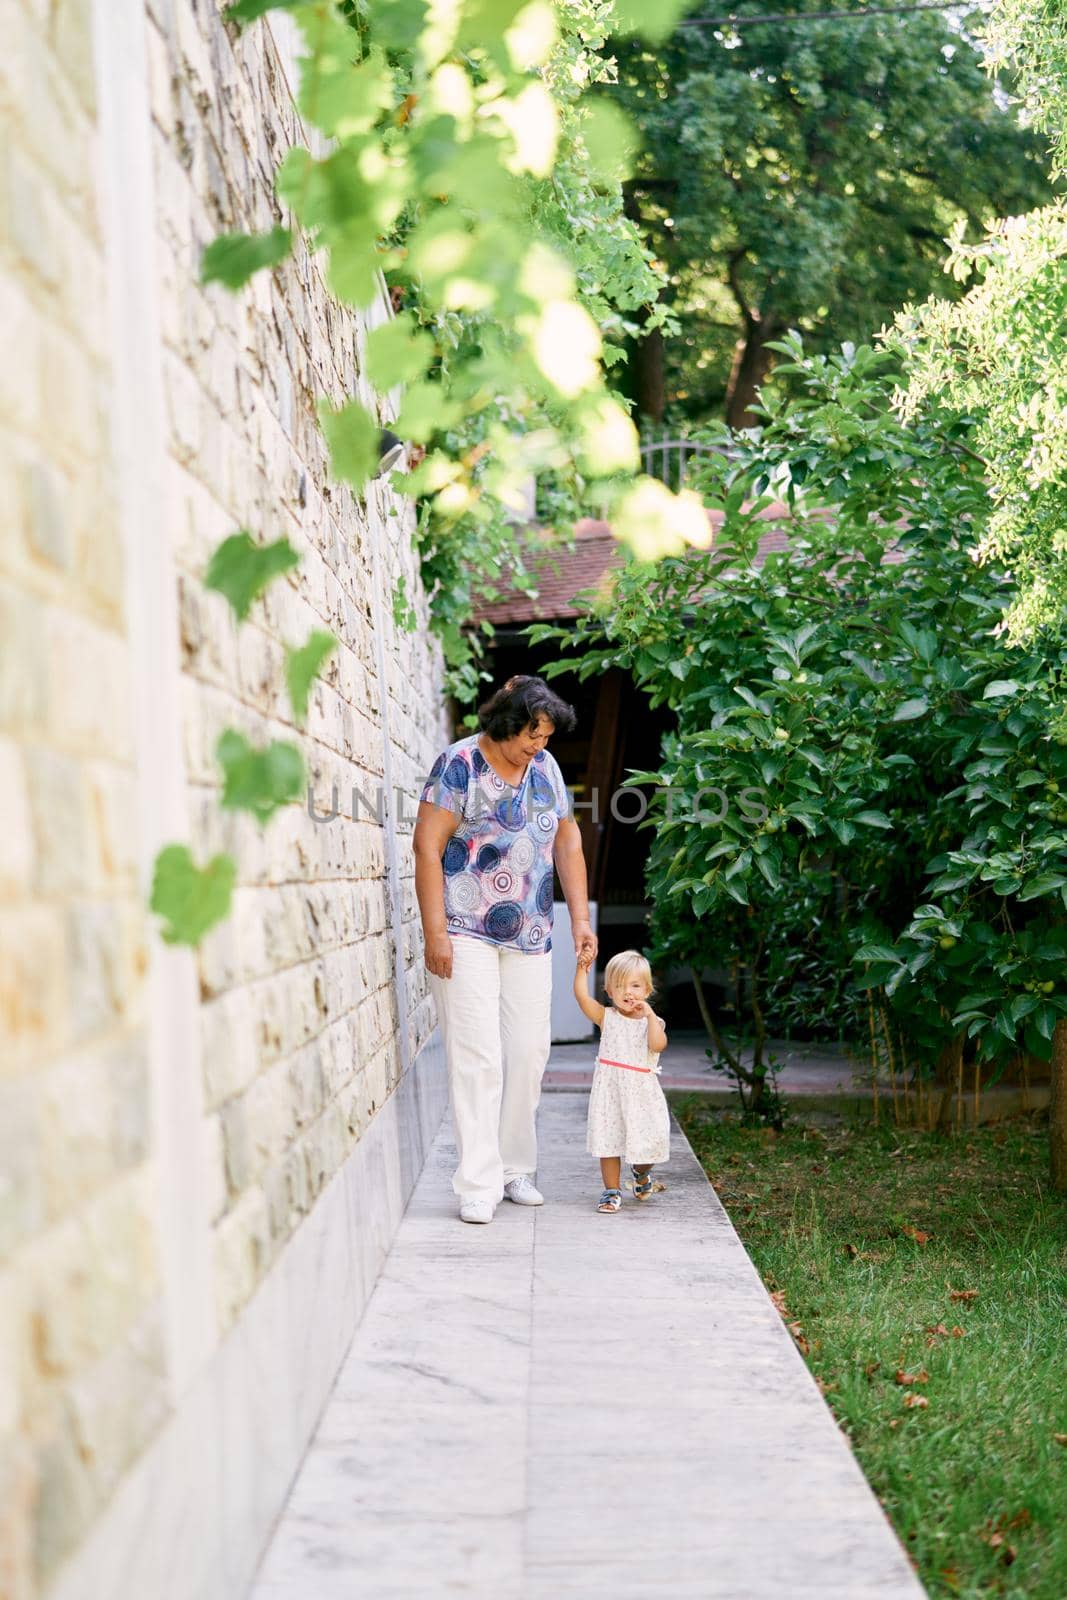 Grandmother with her little granddaughter walk holding hands against a stone wall in the garden. High quality photo